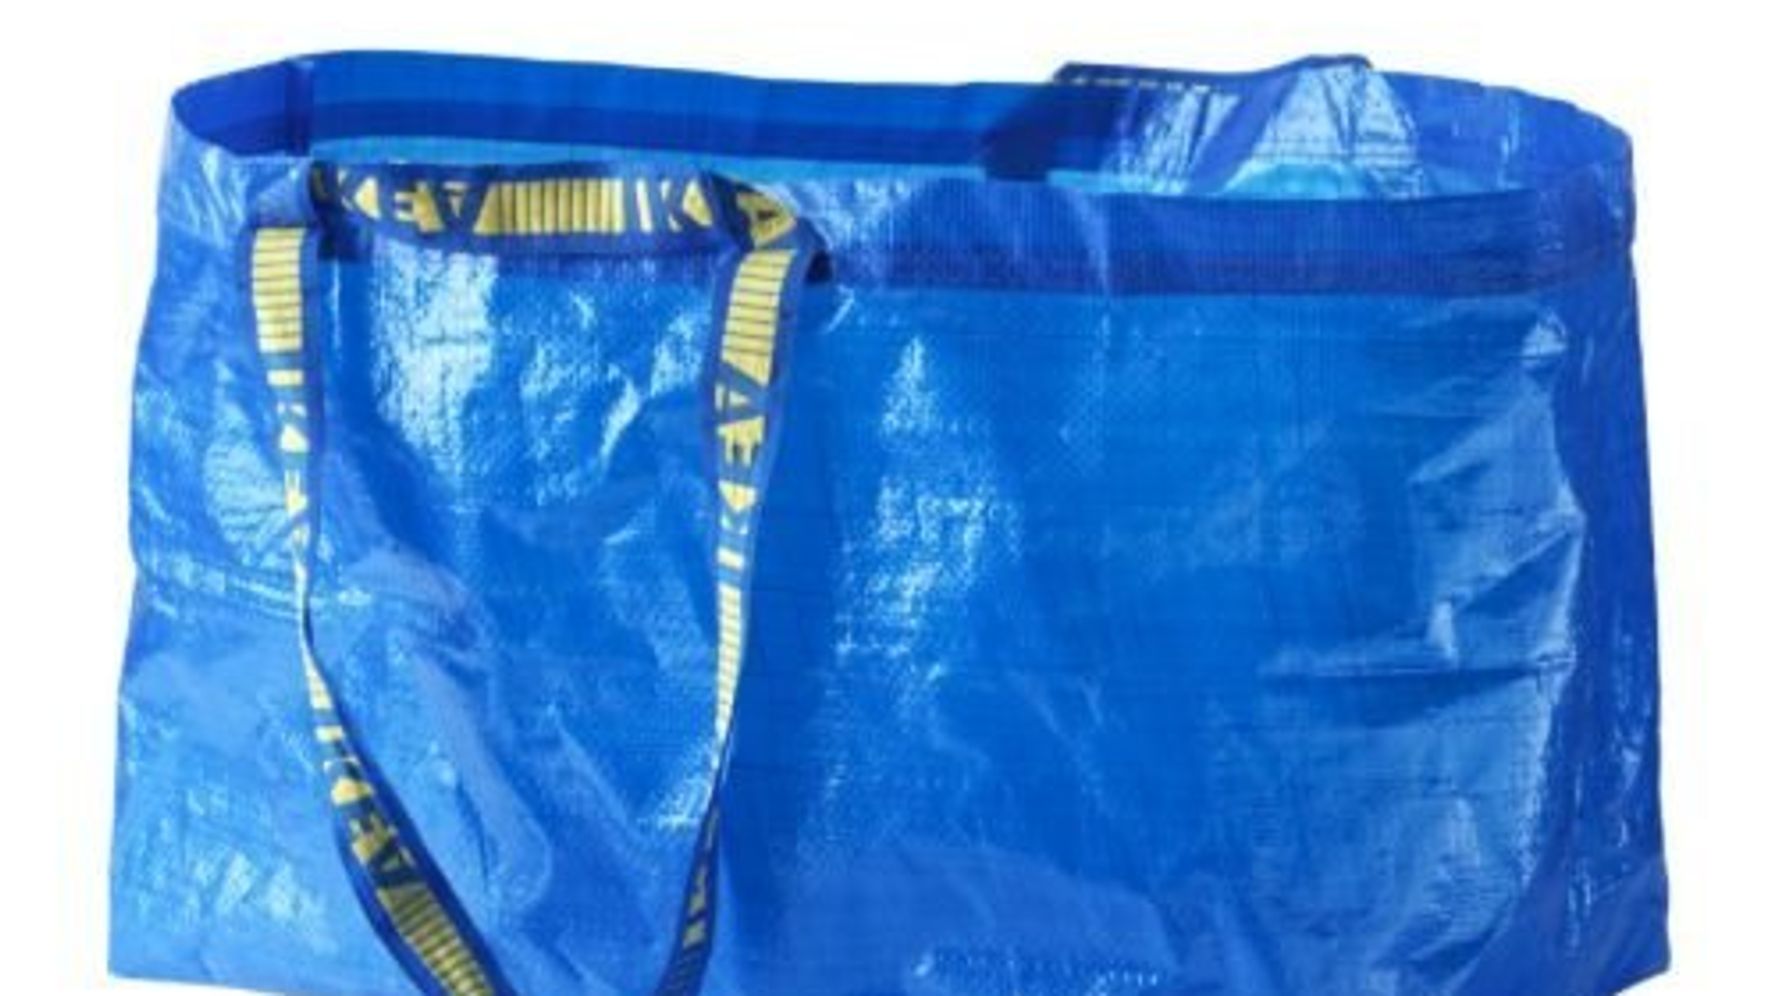 IKEA's iconic blue Frakta bag is getting a makeover by a fashion designer